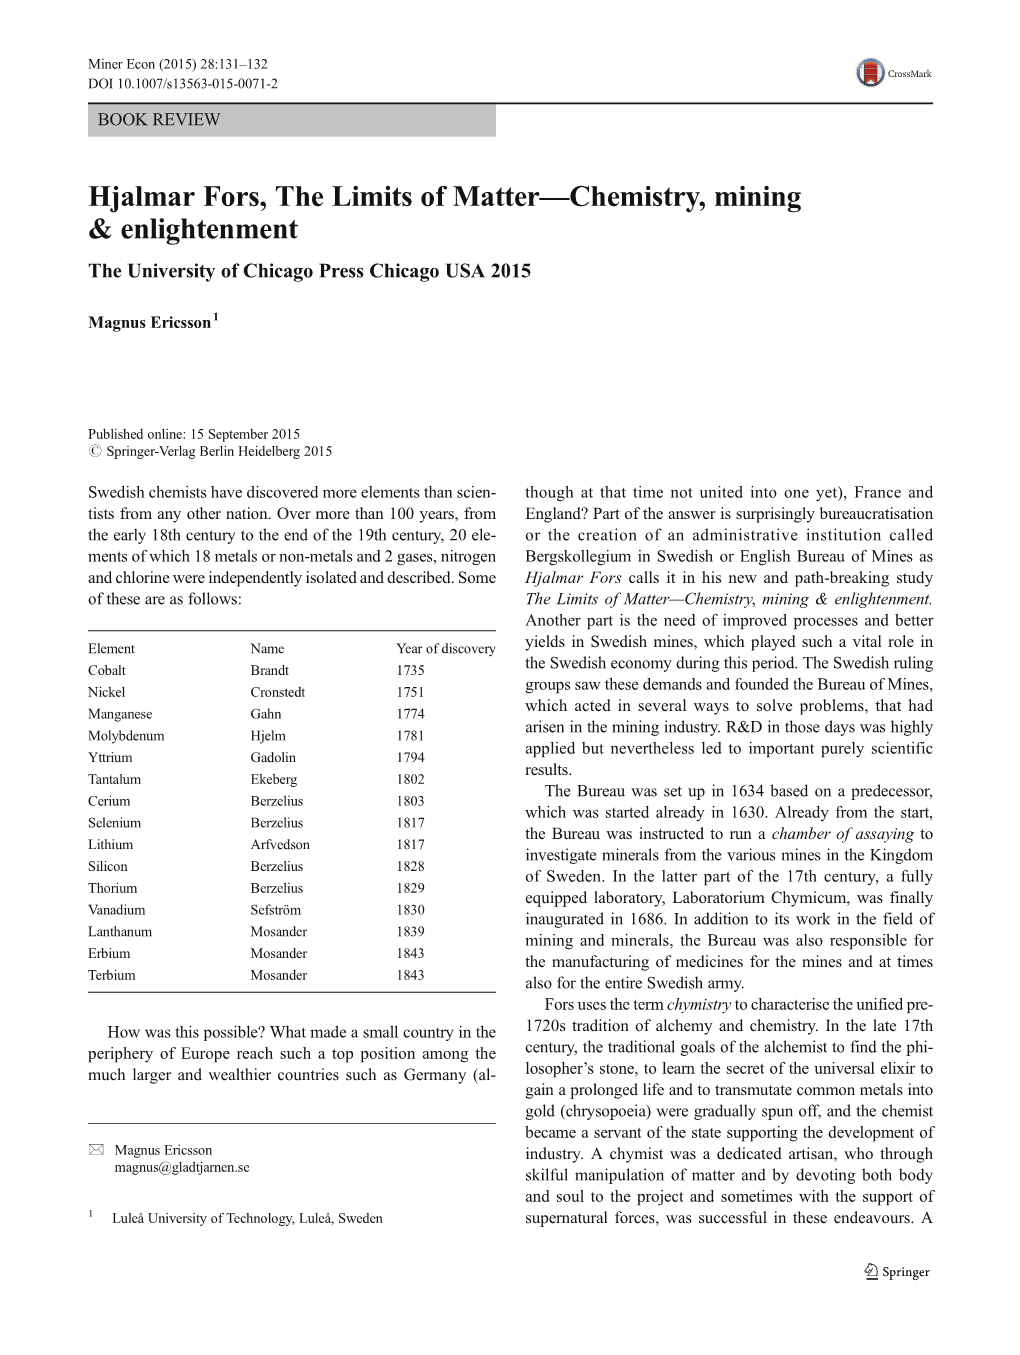 Hjalmar Fors, the Limits of Matter—Chemistry, Mining & Enlightenment